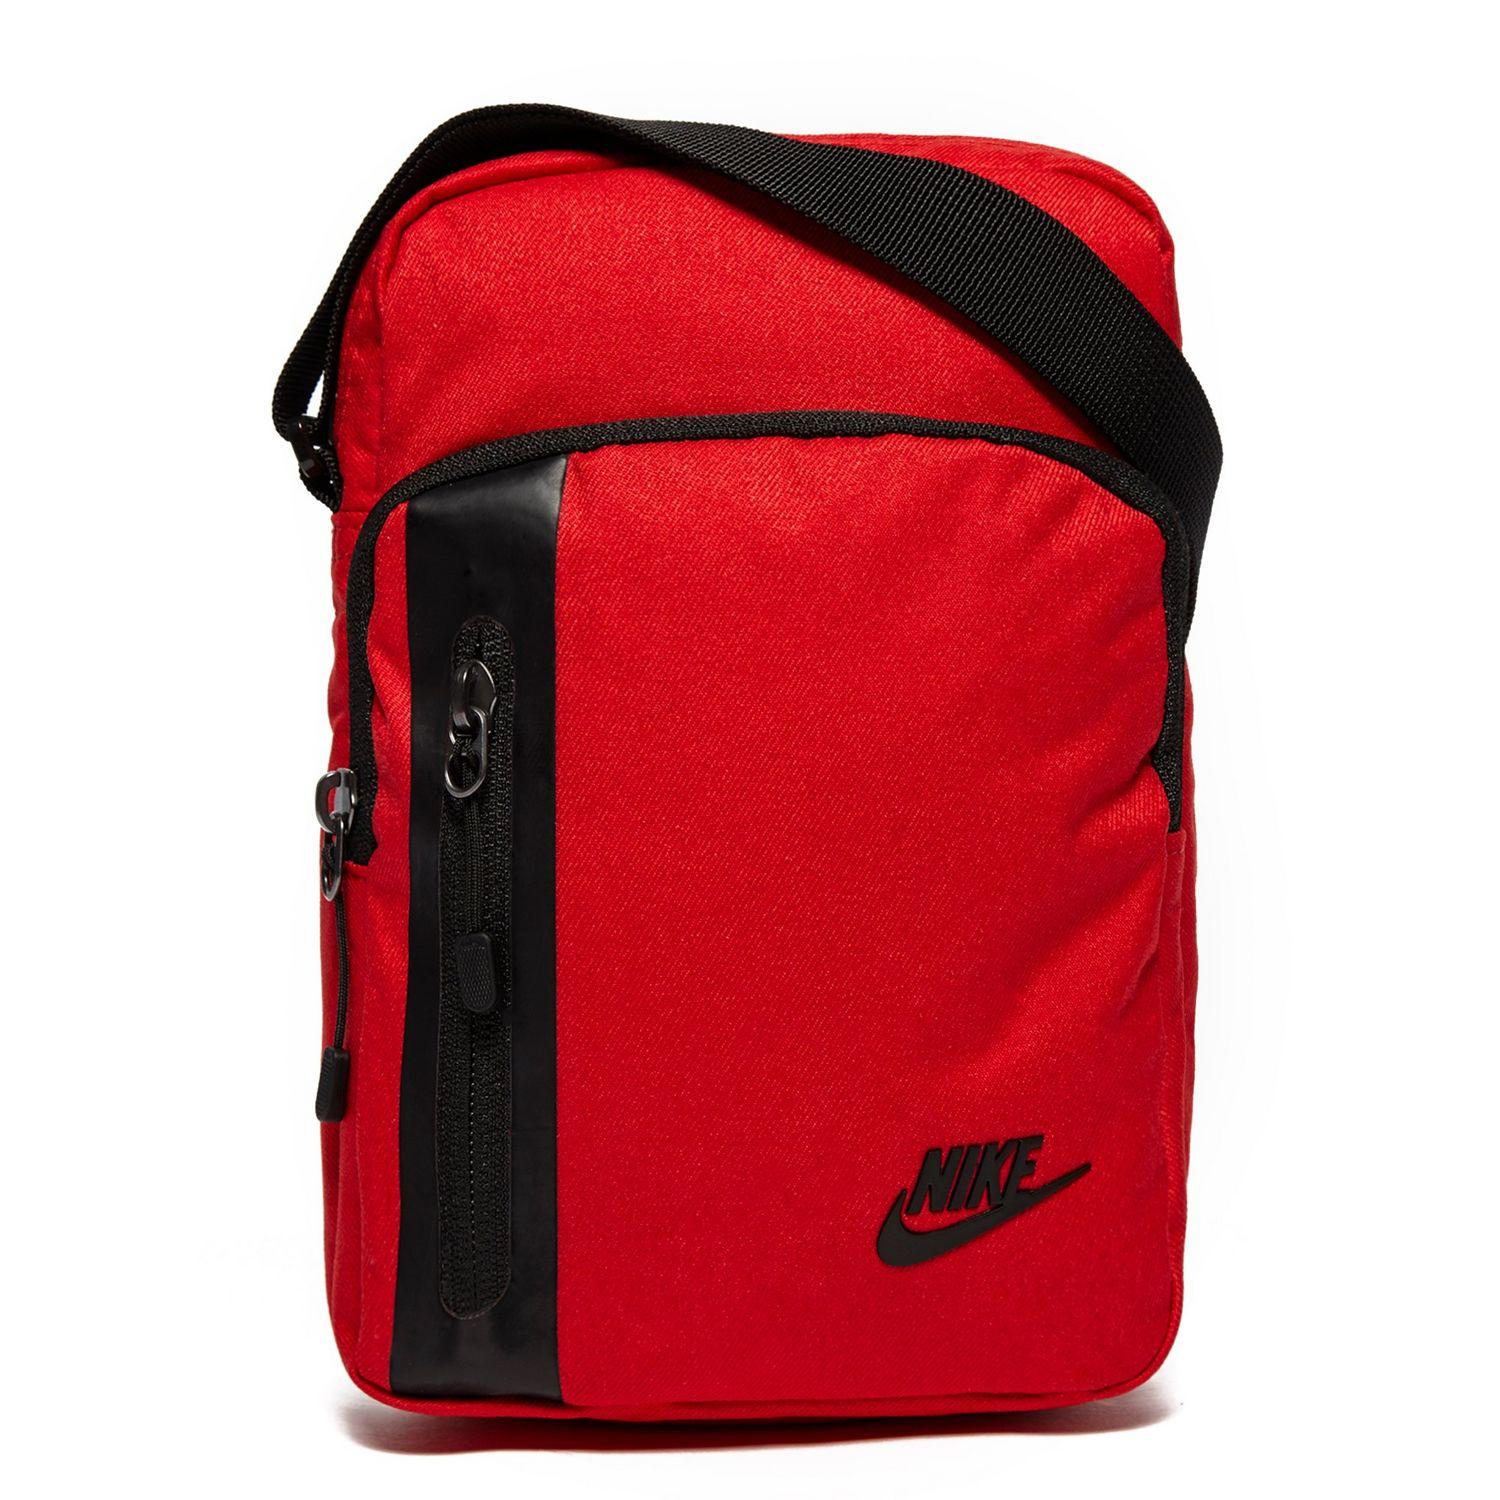 Nike Synthetic Core Small 3.0 Pouch Bag in University Red (Red) - Lyst